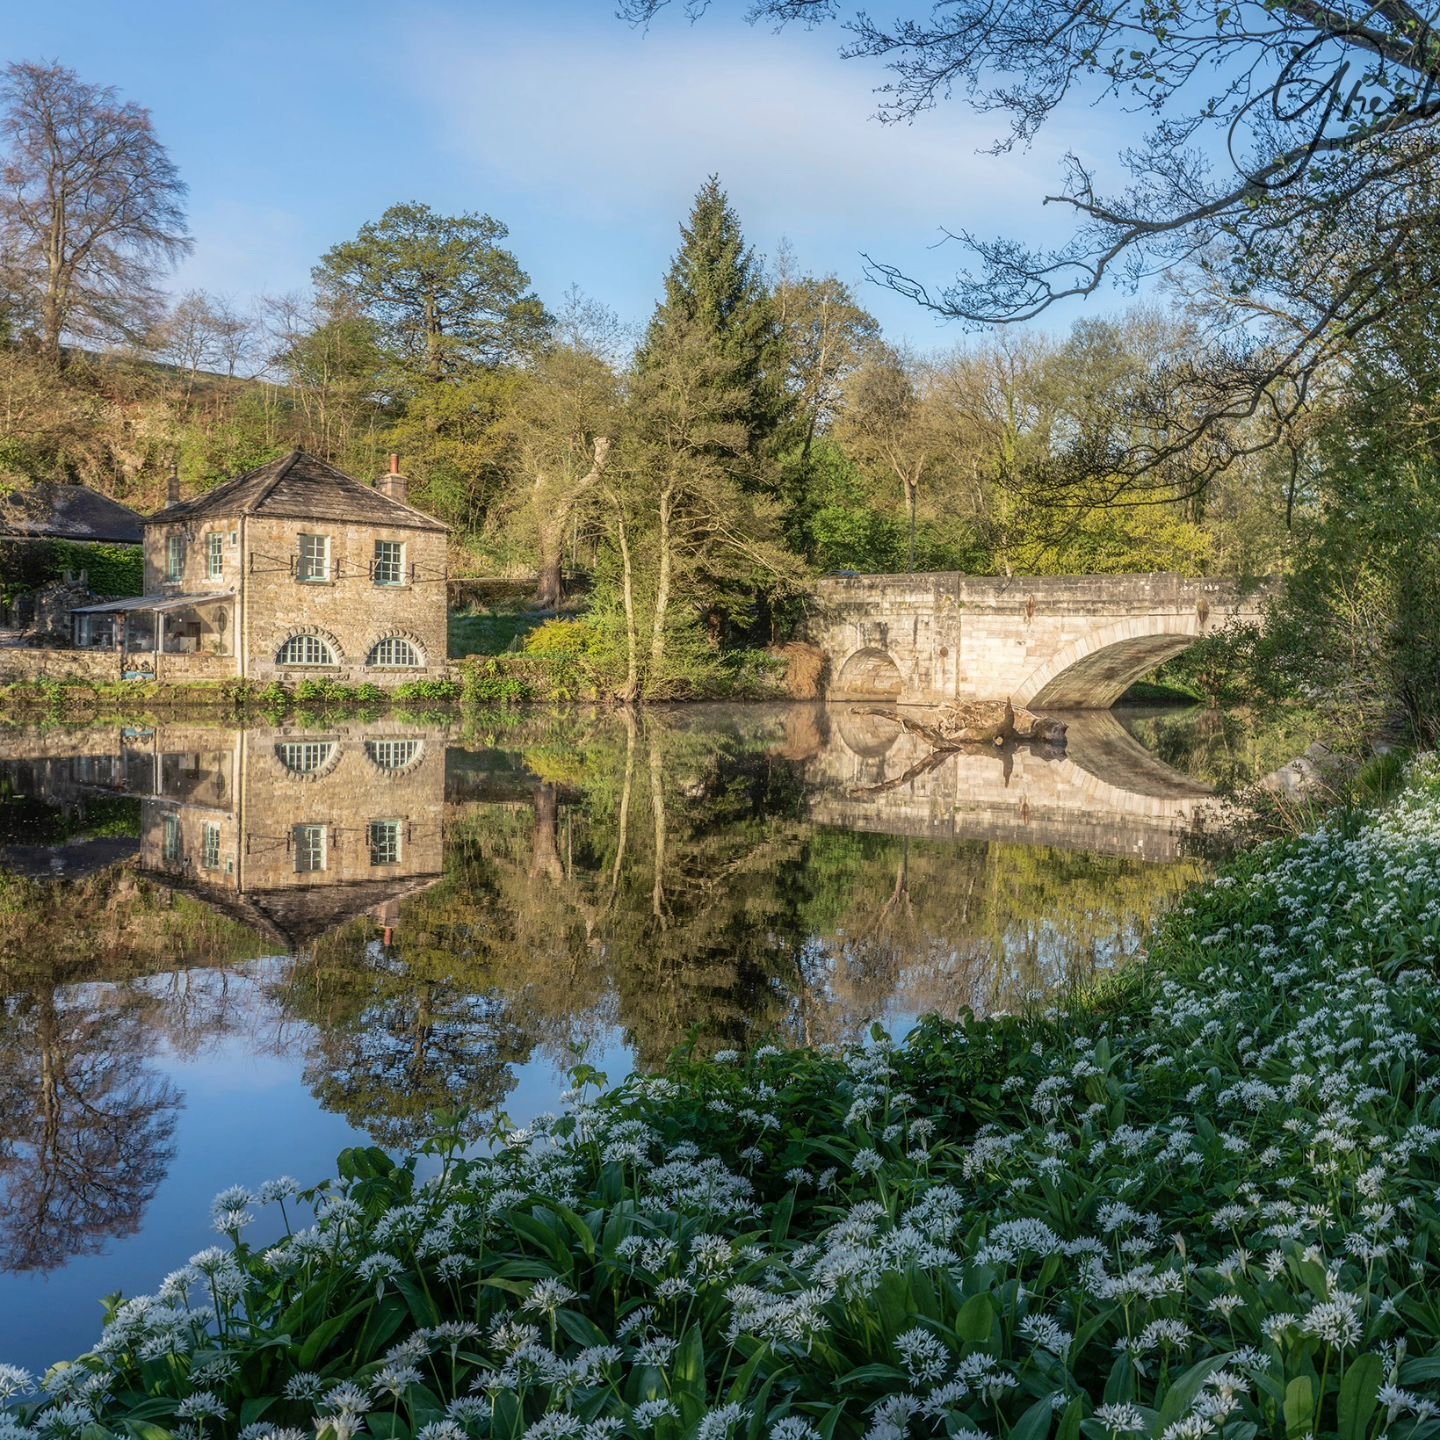 Something Old, Something New

The Old Shuttle House and New Bridge at Calver reflecting in the River Derwent with a banking of wild garlic.

#wildgarlic #calverweir #peakdistrict #reflectionsmag #gloriousbritain #jessopsmoment #appicoftheweek #landsc